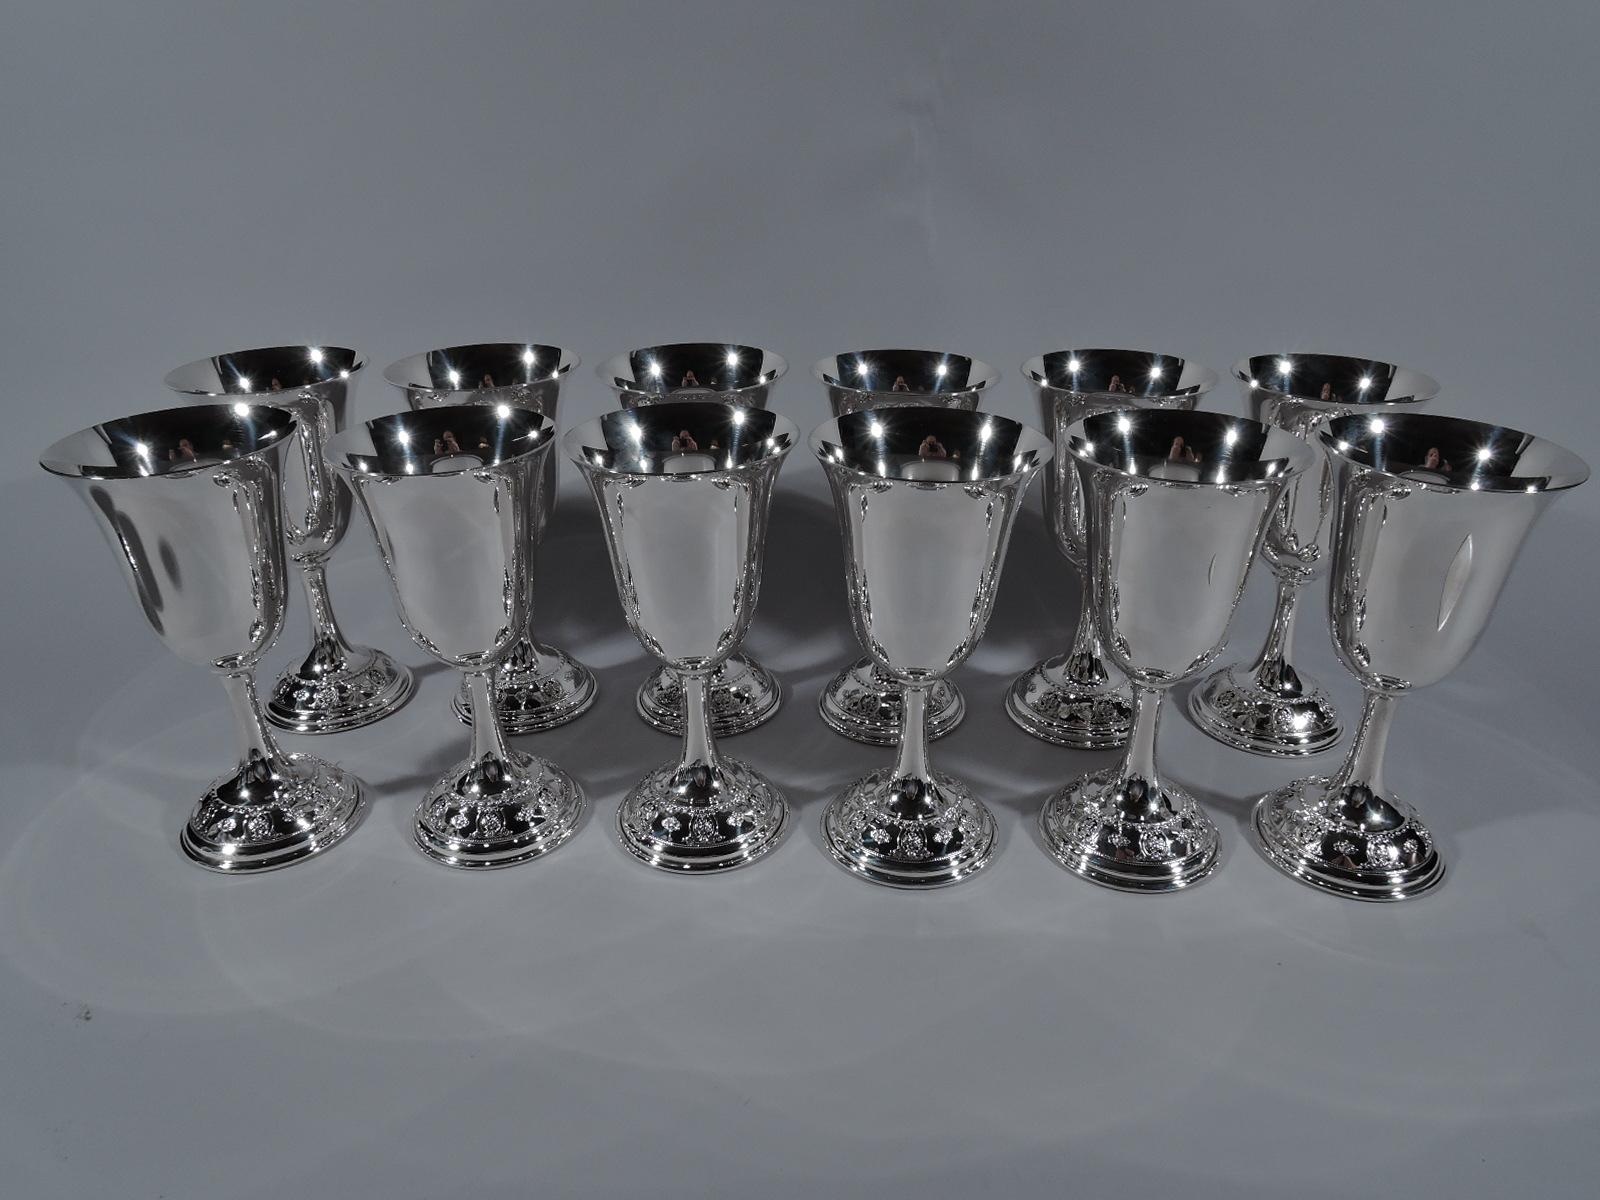 Set of 12 rose point sterling silver goblets. Made by Wallace in Wallingford, Conn. Each: Tapering bowl with fluted rim, cylindrical stem, and raised foot. Foot has chased flower heads alternating with open scrolled ovals inset with flowers. Fully